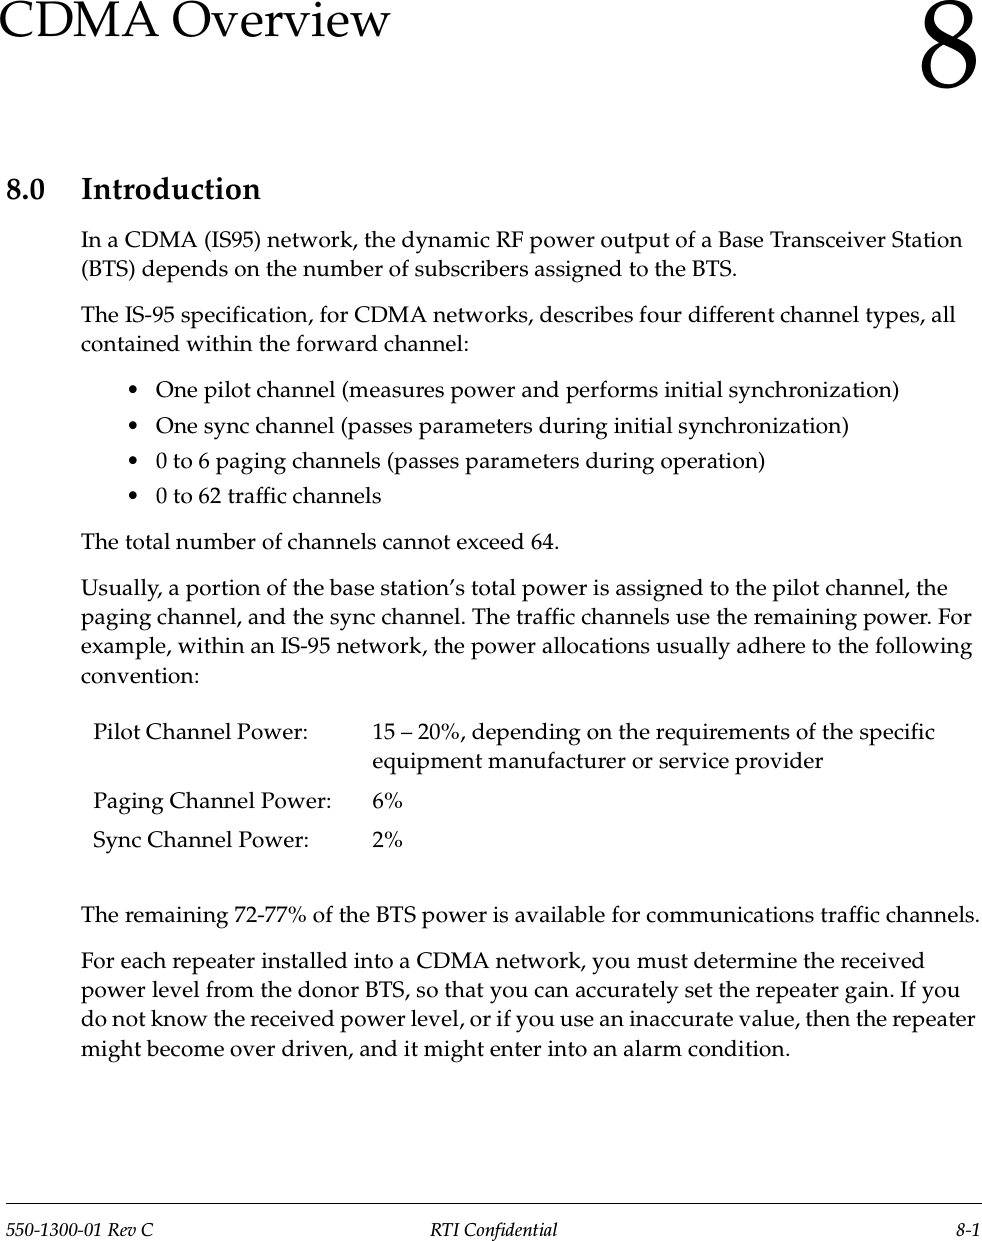 550-1300-01 Rev C RTI Confidential 8-18CDMA Overview8.0 IntroductionIn a CDMA (IS95) network, the dynamic RF power output of a Base Transceiver Station (BTS) depends on the number of subscribers assigned to the BTS.The IS-95 specification, for CDMA networks, describes four different channel types, all contained within the forward channel:•One pilot channel (measures power and performs initial synchronization)•One sync channel (passes parameters during initial synchronization)•0 to 6 paging channels (passes parameters during operation)•0 to 62 traffic channelsThe total number of channels cannot exceed 64.Usually, a portion of the base station’s total power is assigned to the pilot channel, the paging channel, and the sync channel. The traffic channels use the remaining power. For example, within an IS-95 network, the power allocations usually adhere to the following convention: The remaining 72-77% of the BTS power is available for communications traffic channels.For each repeater installed into a CDMA network, you must determine the received power level from the donor BTS, so that you can accurately set the repeater gain. If you do not know the received power level, or if you use an inaccurate value, then the repeater might become over driven, and it might enter into an alarm condition.Pilot Channel Power: 15 – 20%, depending on the requirements of the specific equipment manufacturer or service providerPaging Channel Power: 6%Sync Channel Power: 2%